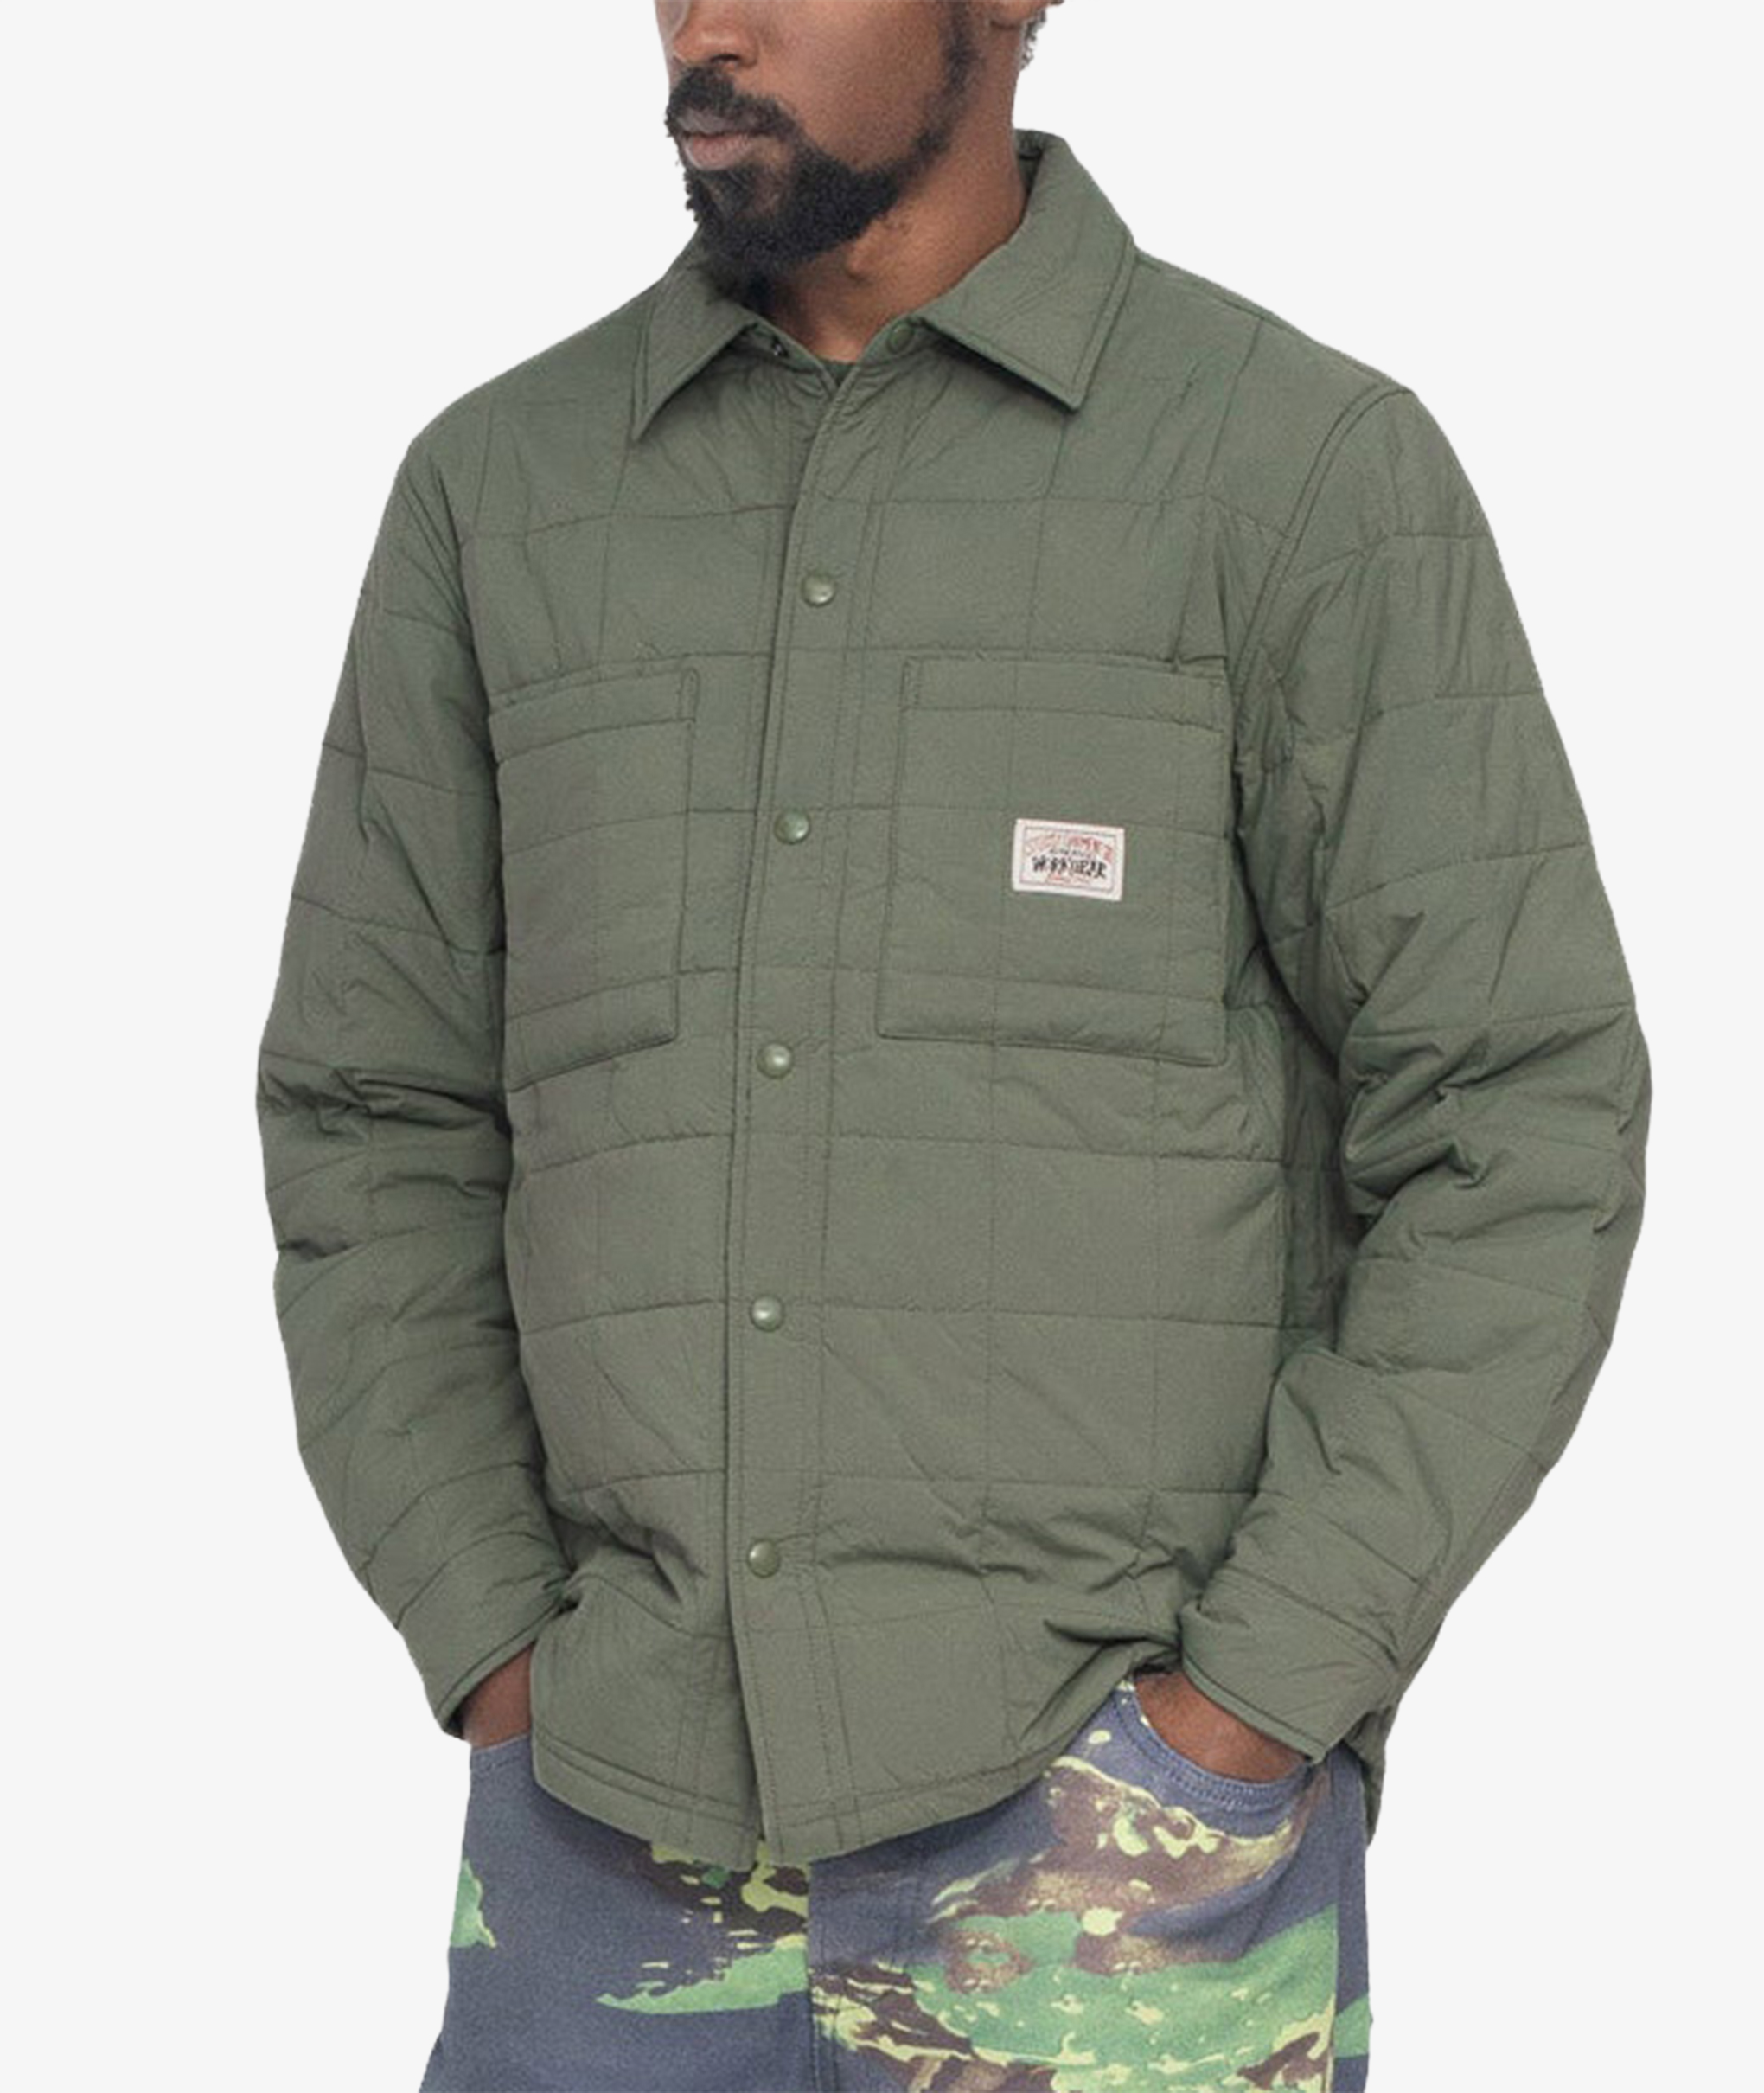 Norse Store | Shipping Worldwide - Stüssy Quilted Fatigue Shirt 